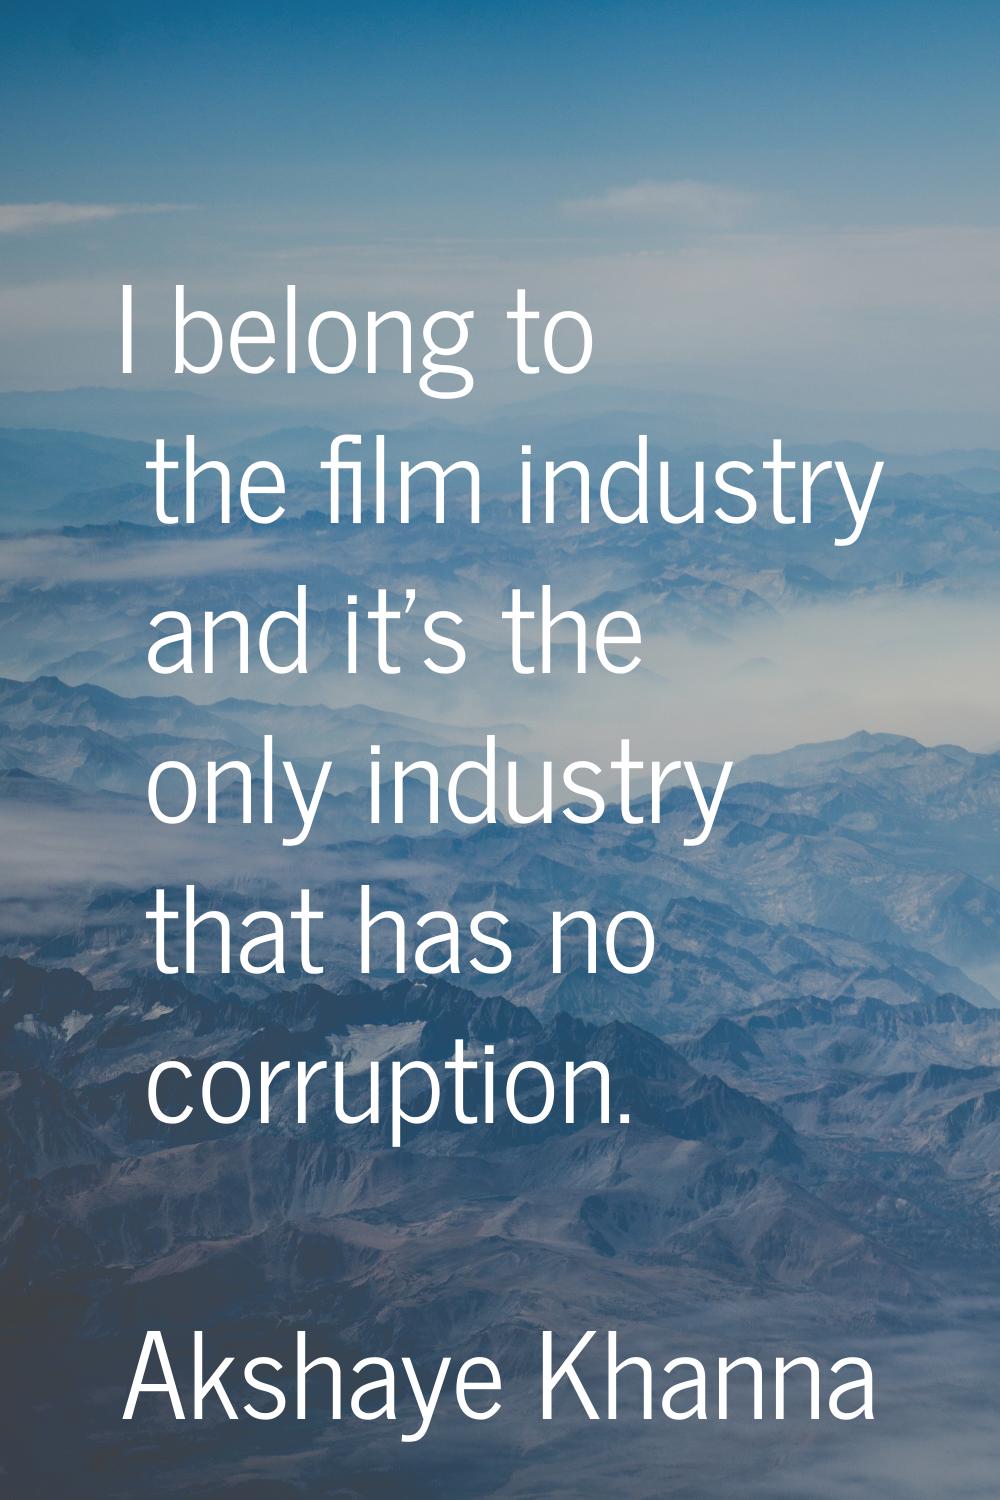 I belong to the film industry and it's the only industry that has no corruption.